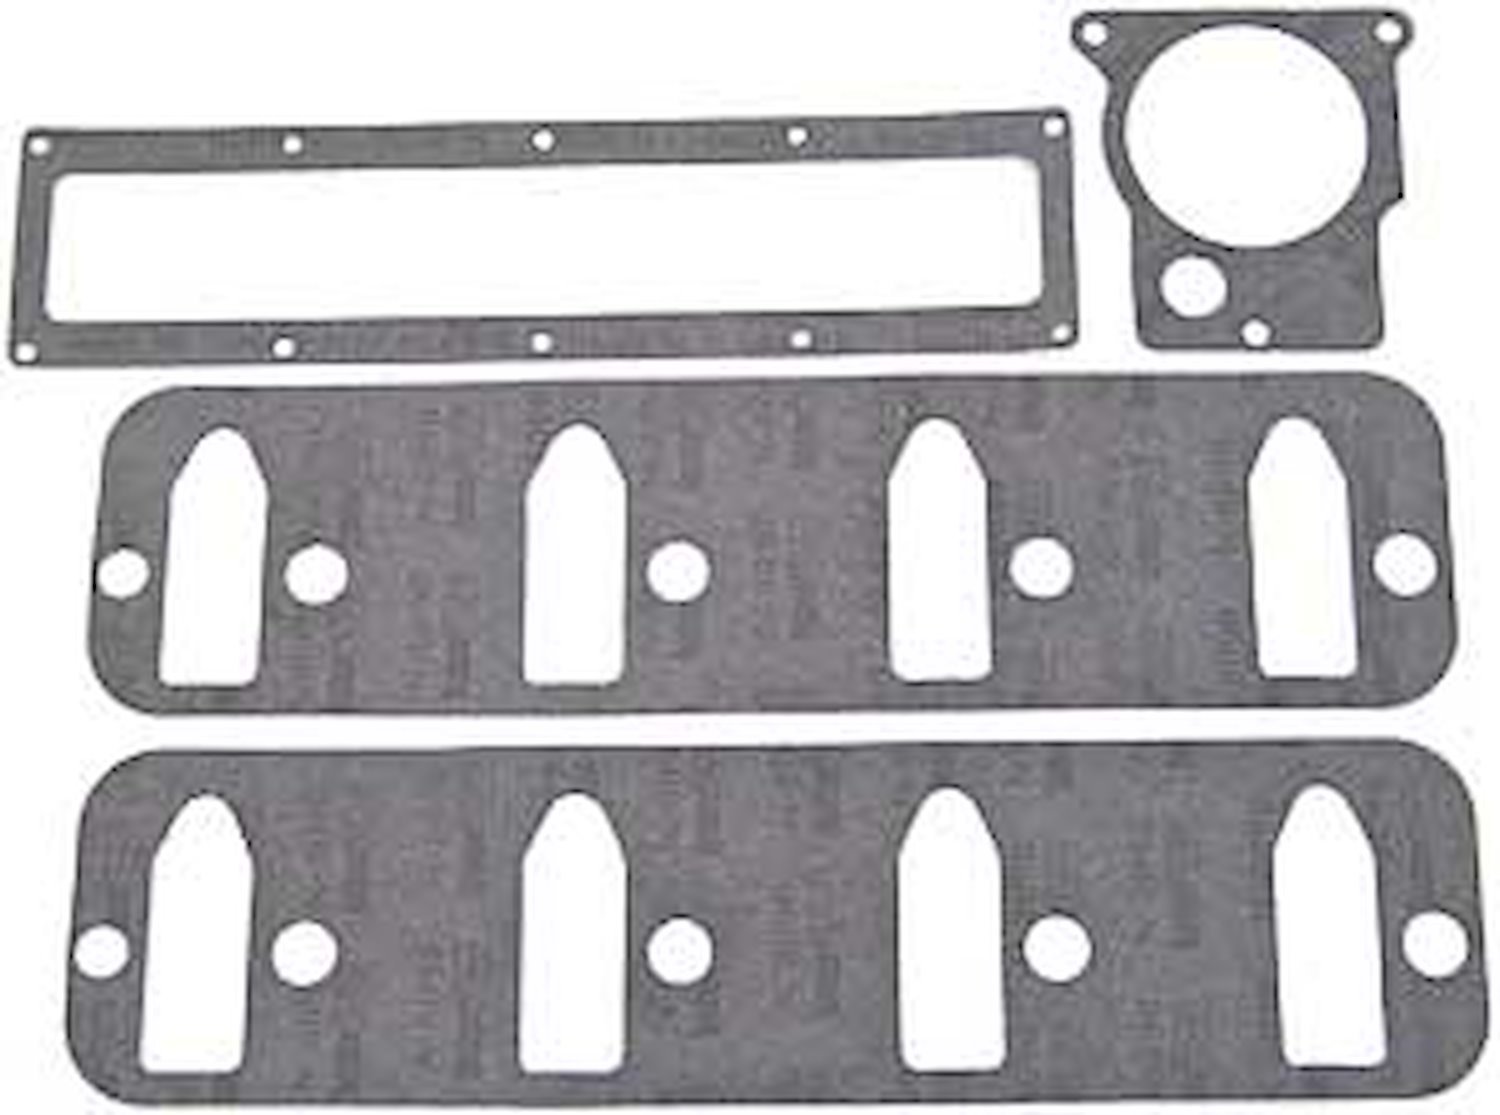 Replacement LS1 Intake Gasket Fits 925-300-111 and 925-300-111P